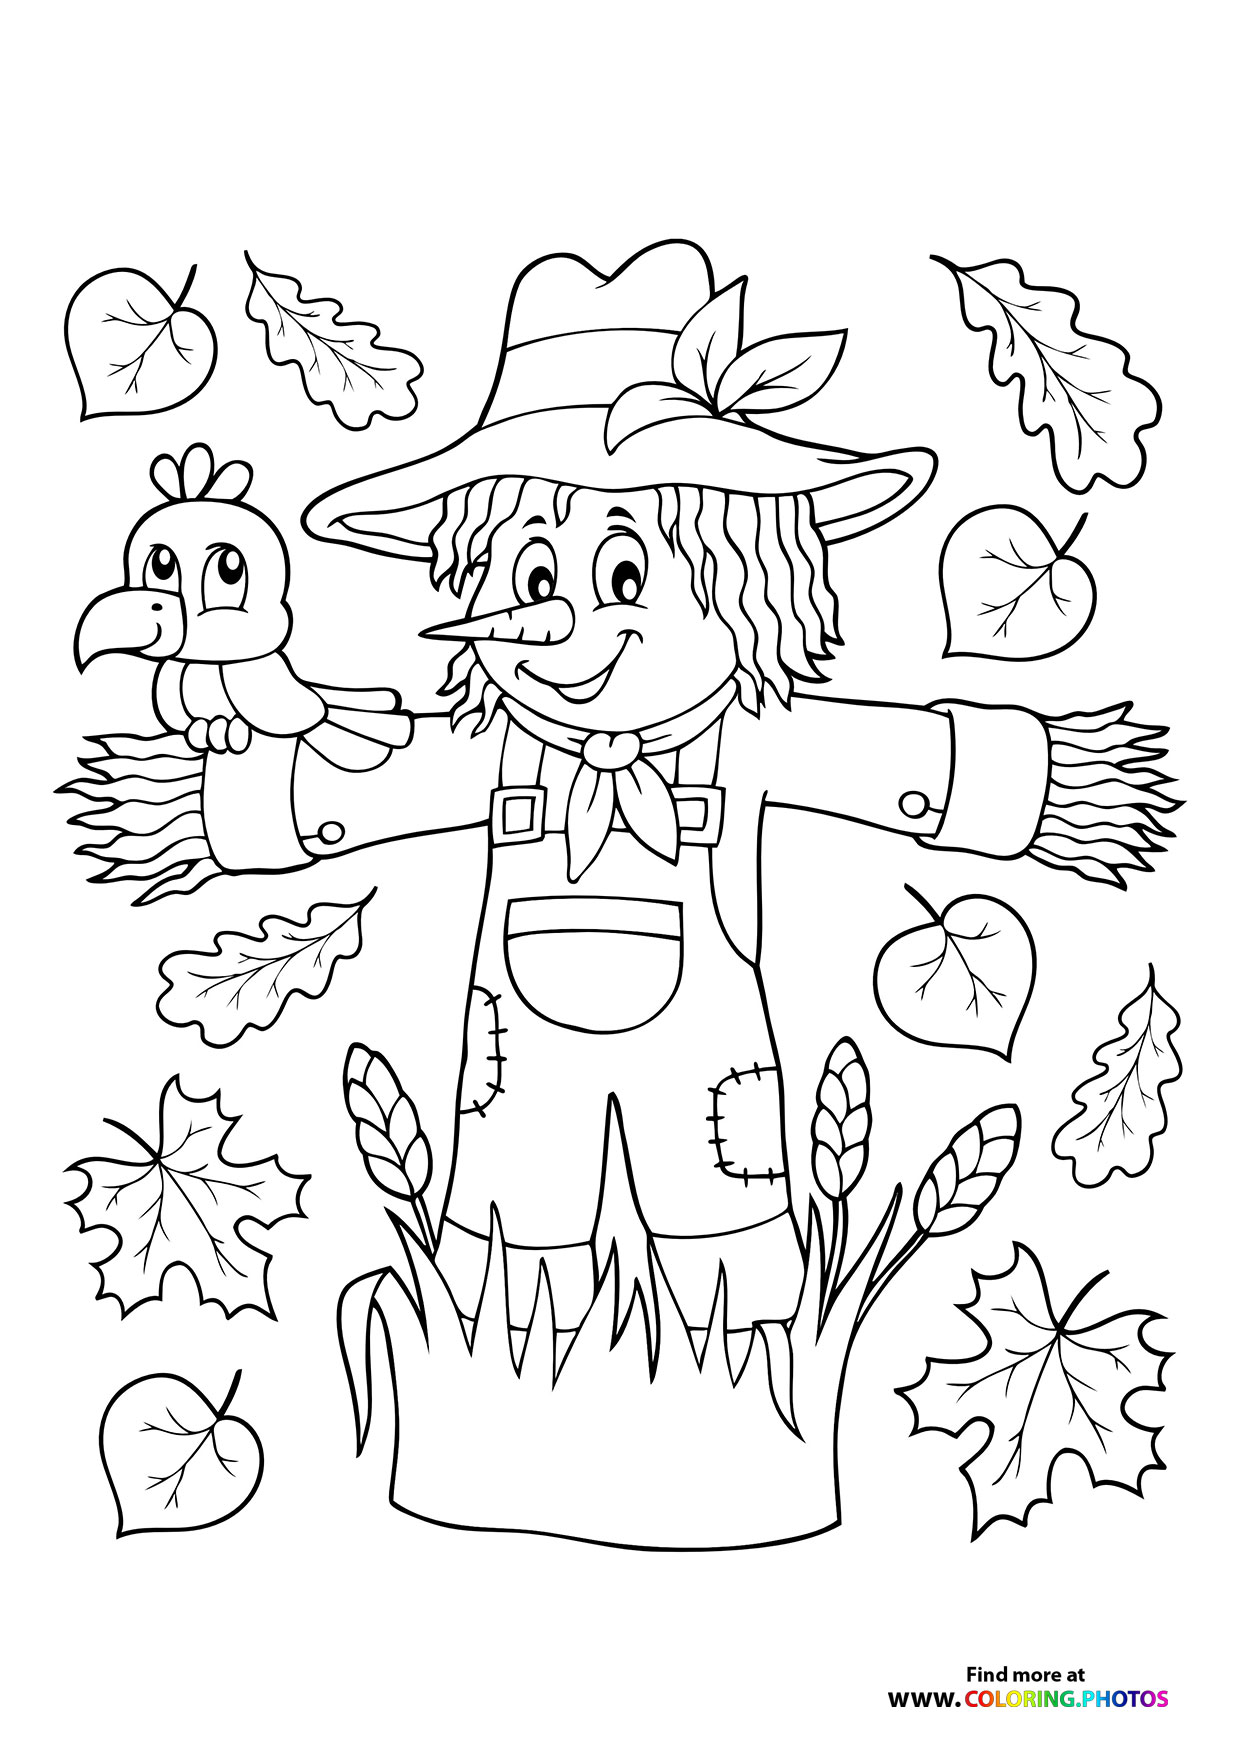 Autumn scarecrow with a crow